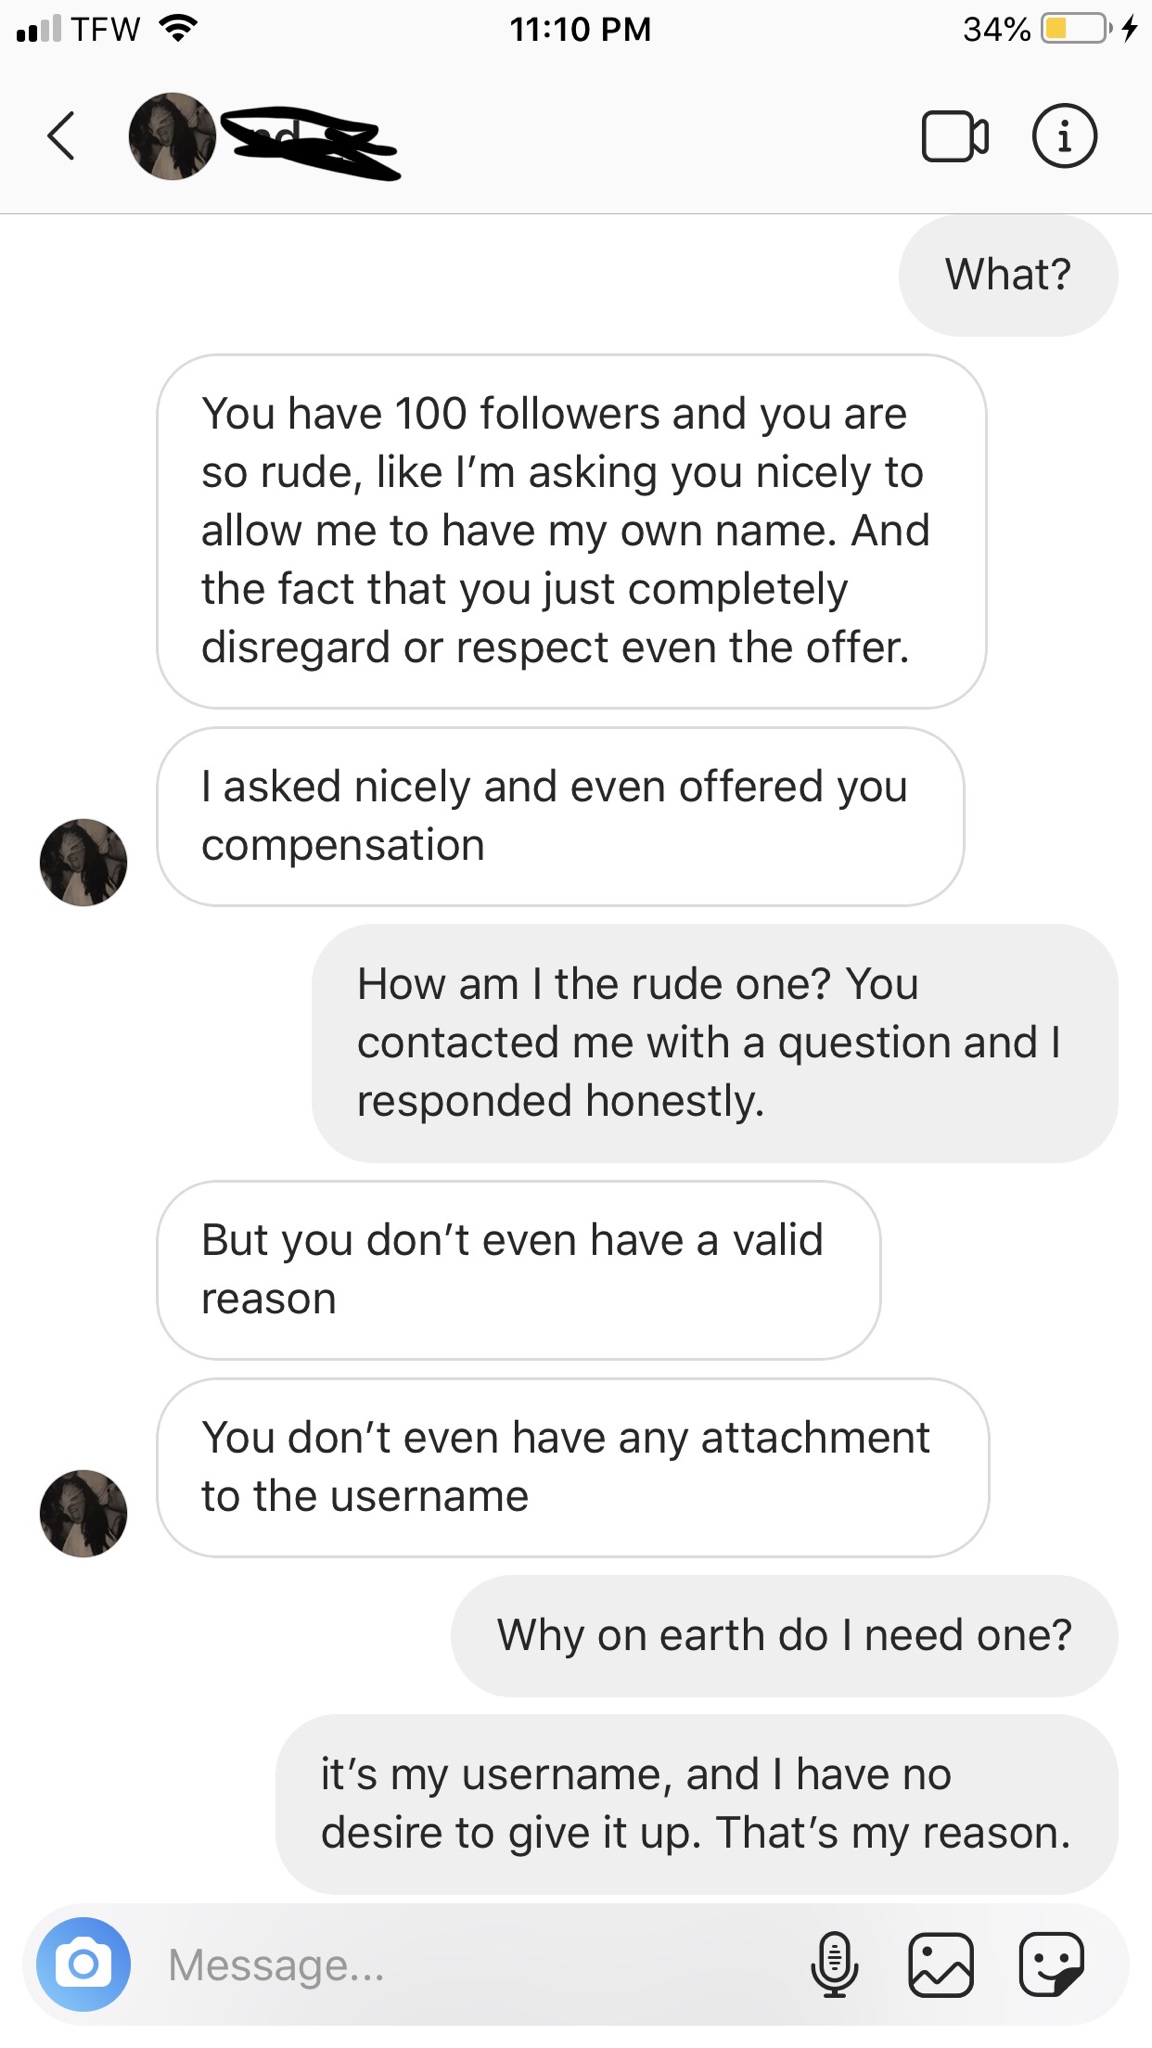 screenshot - ... Tfw ? 34% 0 4 What? You have 100 ers and you are so rude, I'm asking you nicely to allow me to have my own name. And the fact that you just completely disregard or respect even the offer. Tasked nicely and even offered you compensation Ho